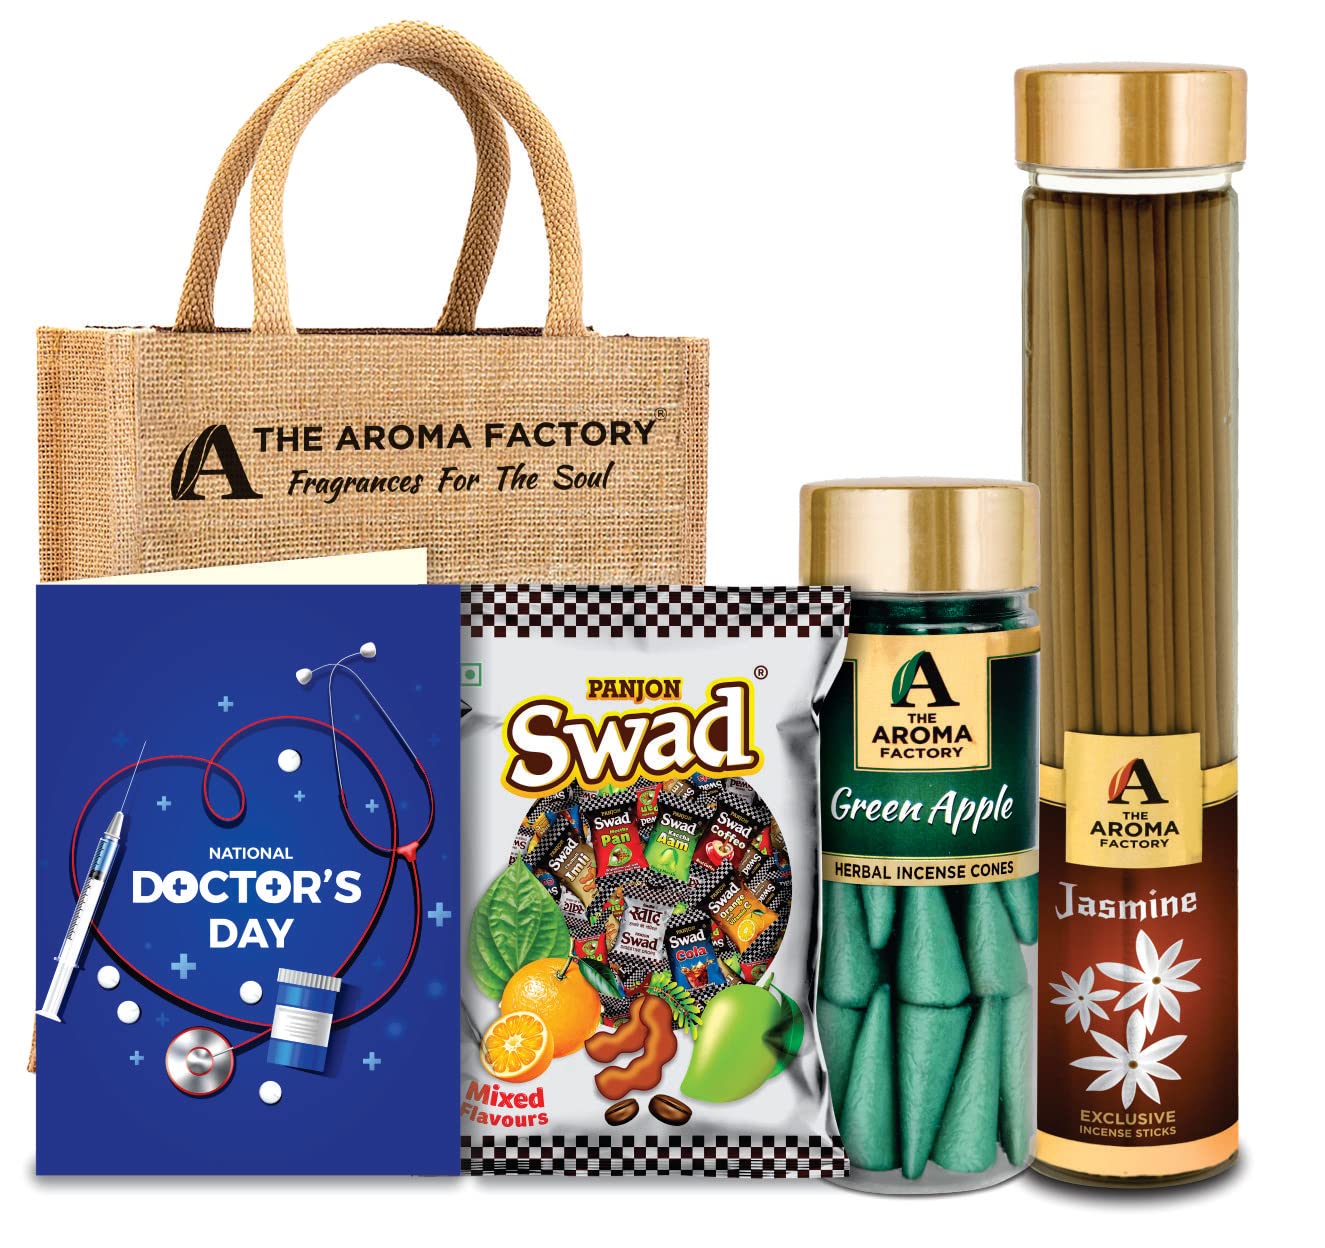 The Aroma Factory Happy Doctors Day Gift Hamper Set (Swad Mix 25 Candy, Incense Jasmine Agarbatti, Green Apple Dhoopcone, Greeting Card, Jute Bag) Gift Item